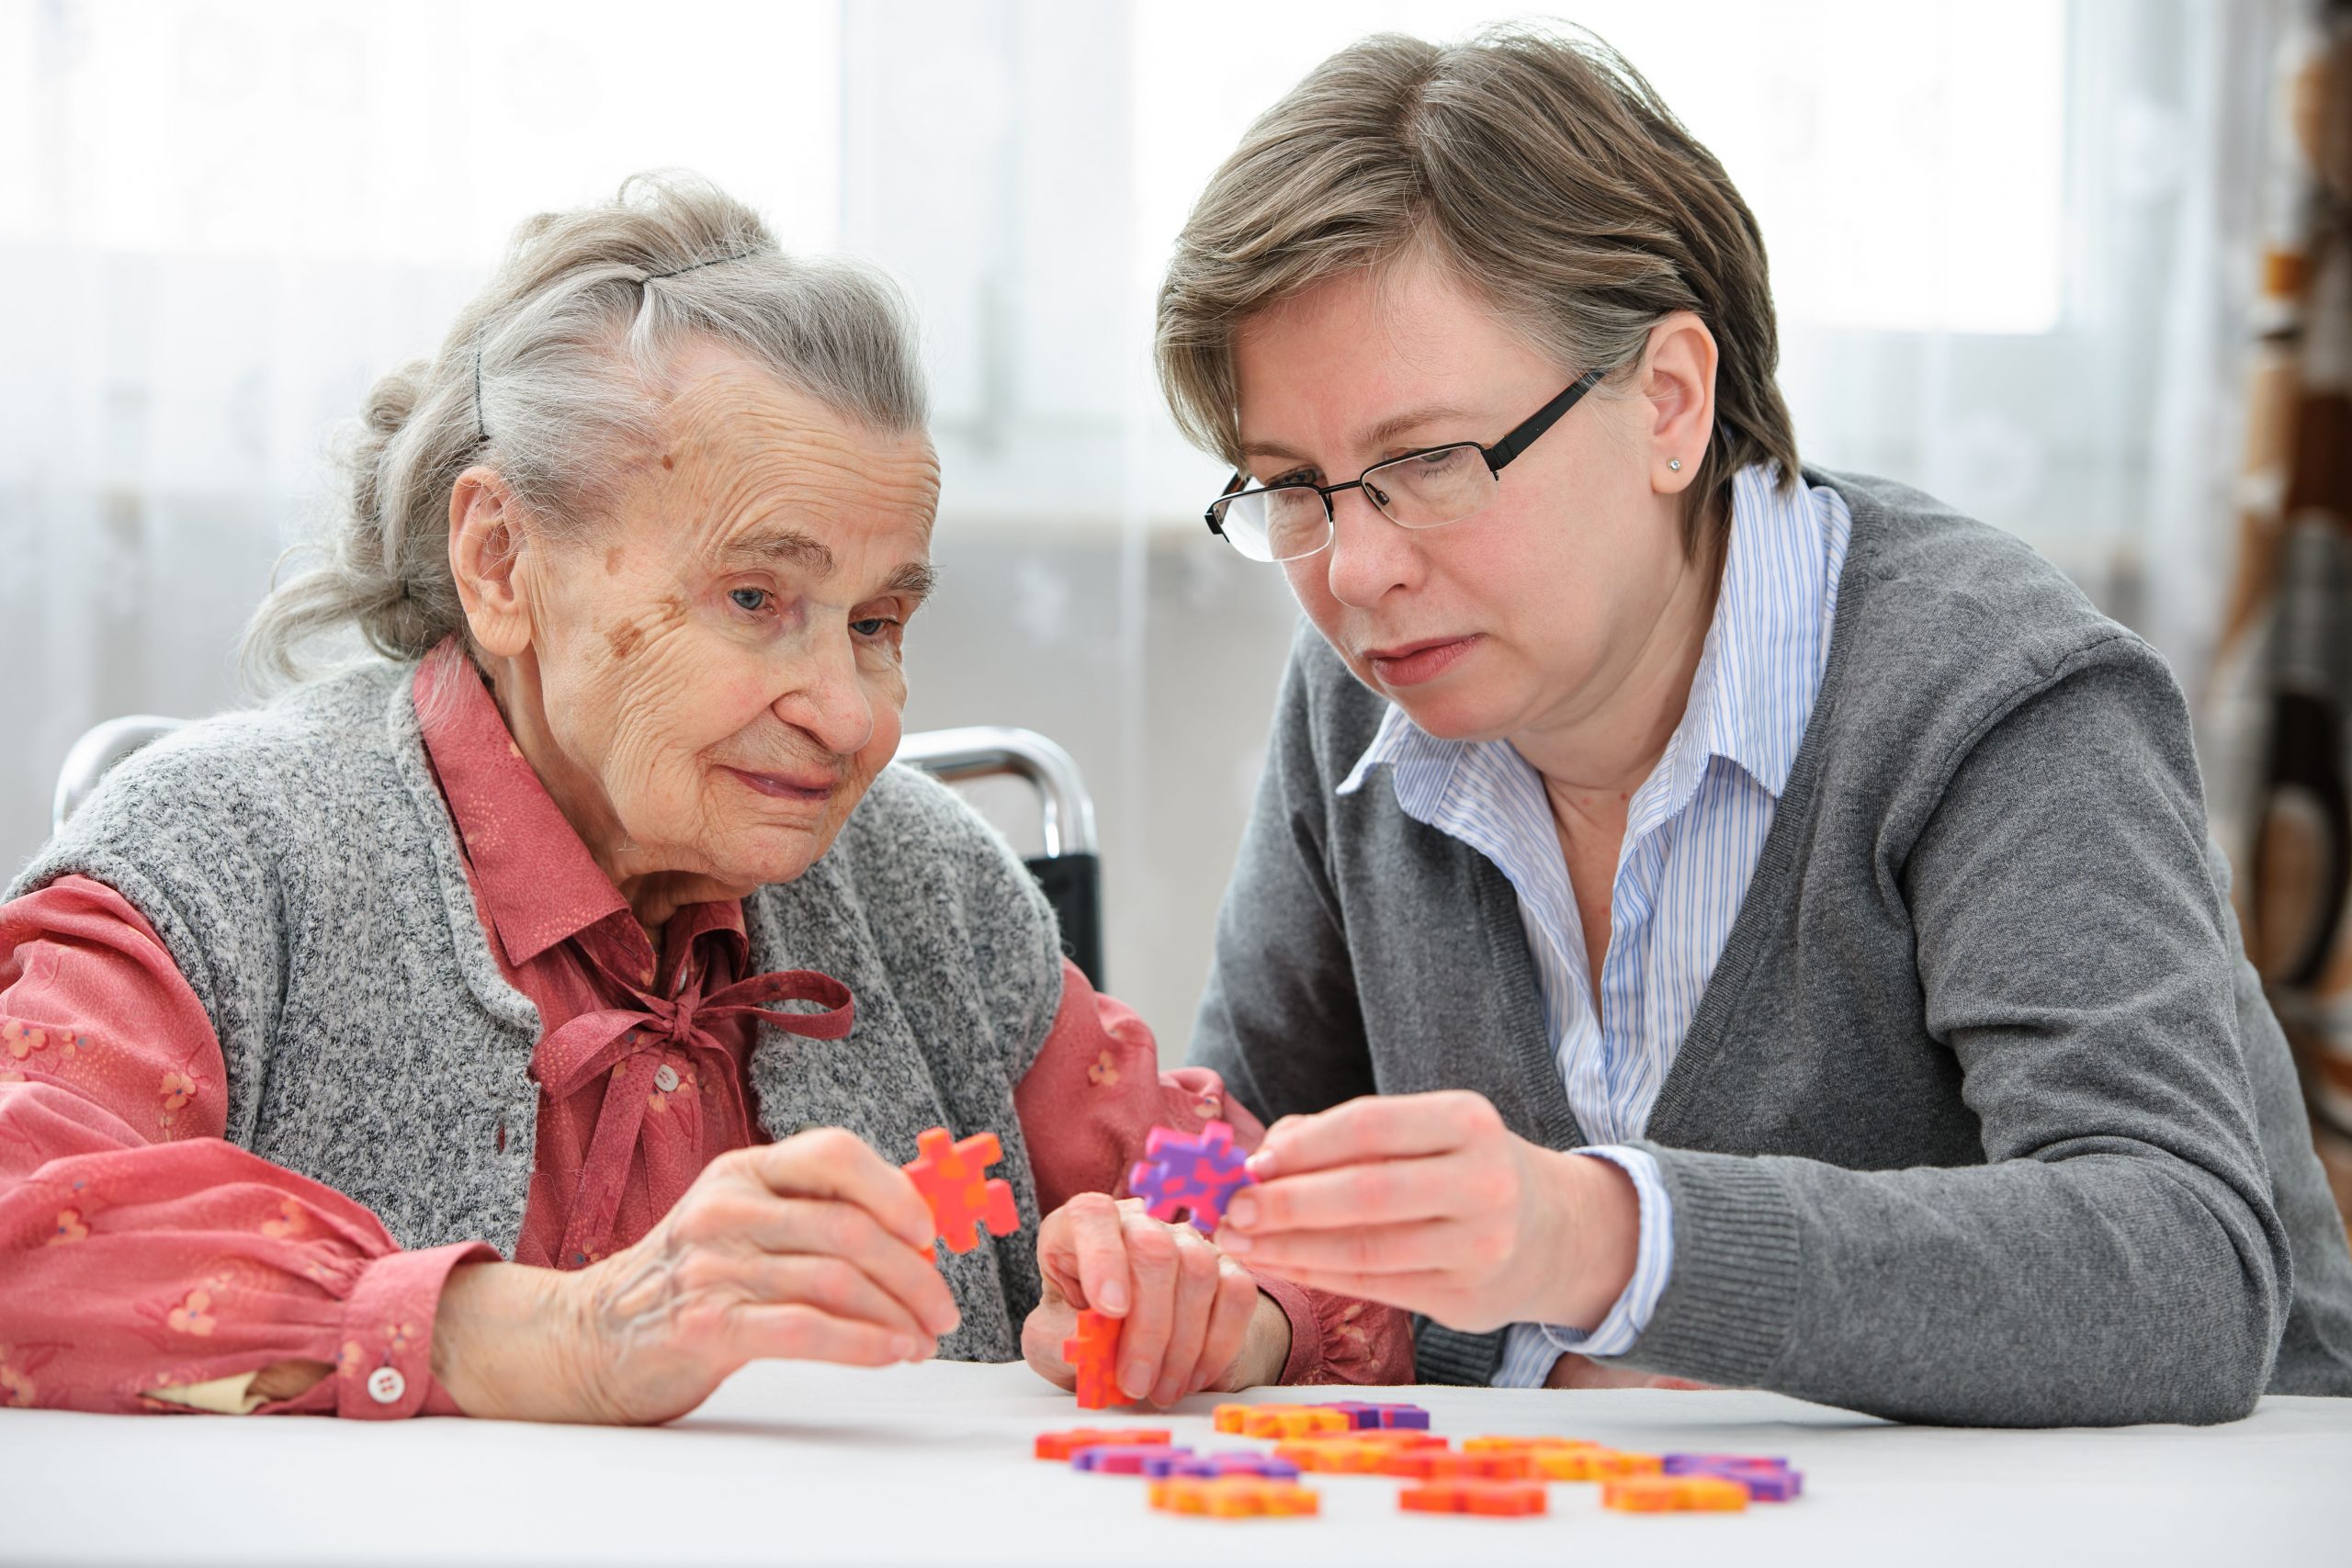 Dementia care trainee working with Alzheimer's patient through skill-building tools gained from dementia care workshop.